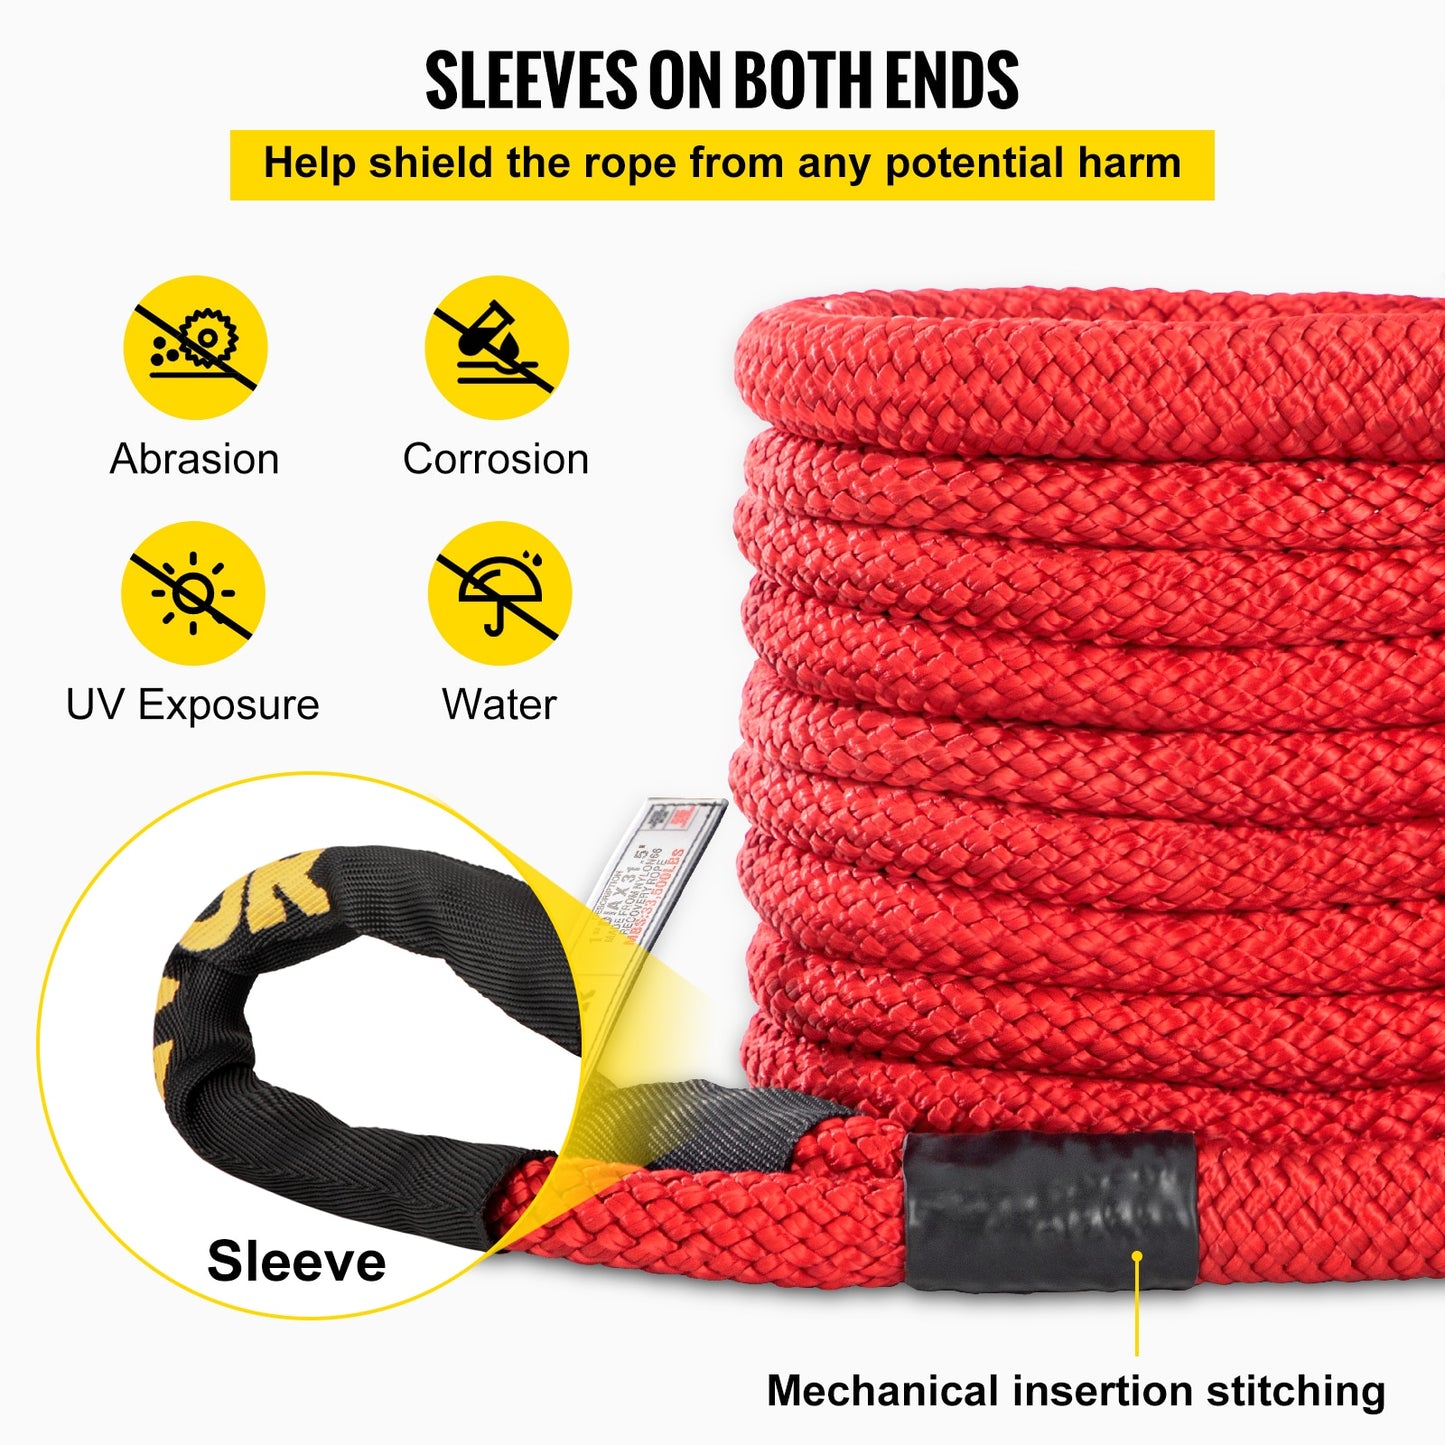 VEVOR Recovery Tow Rope Heavy Duty Nylon Double Braided Kinetic Energy Rope w/ Loops an and Protective Sleeves for Truck ATV UTV